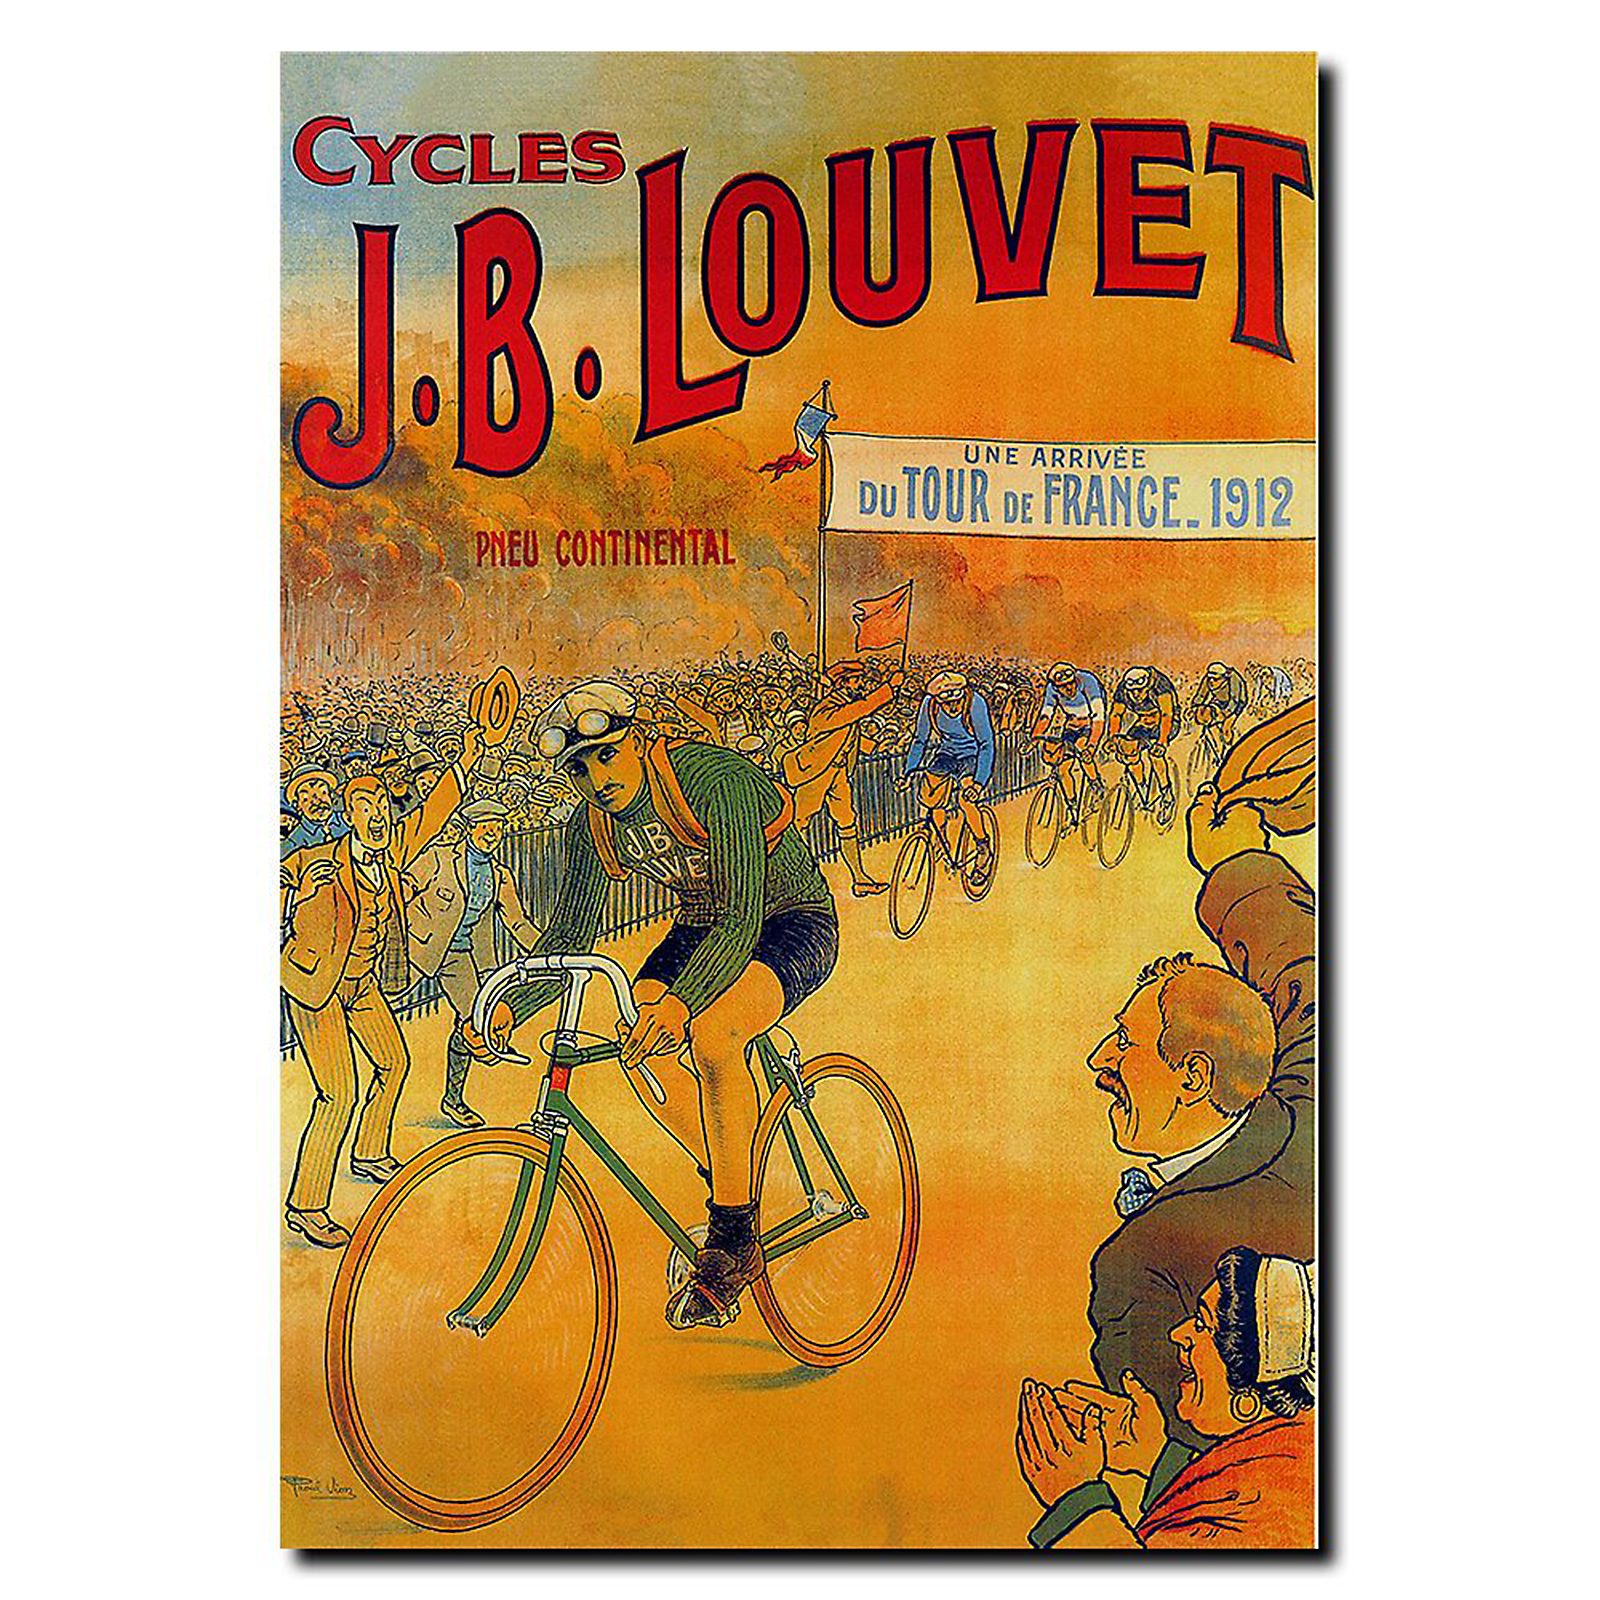 Trademark Global 18x24 inches "Cycles JB Louvet"